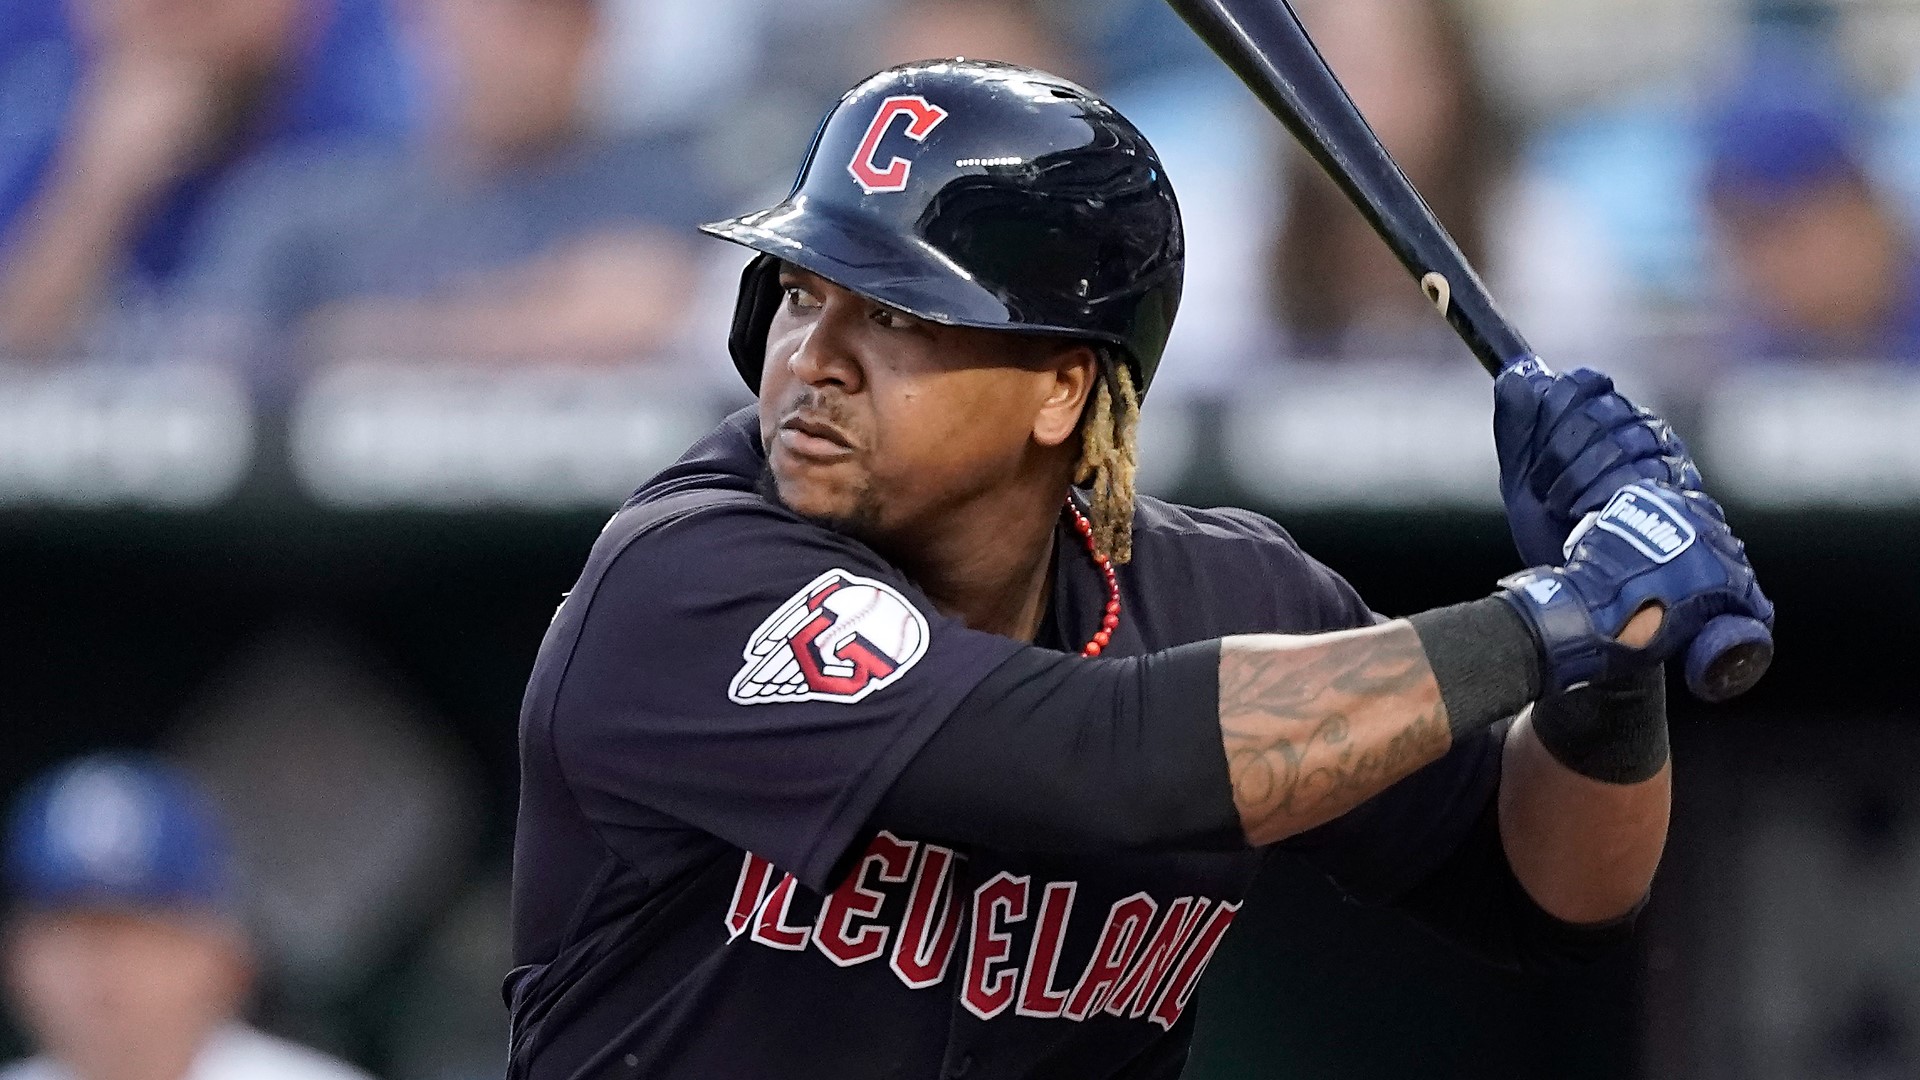 Play ball! Here's what fans need to know as the Cleveland Guardians battle the Tampa Bay Rays in the Wild Card at Progressive Field.